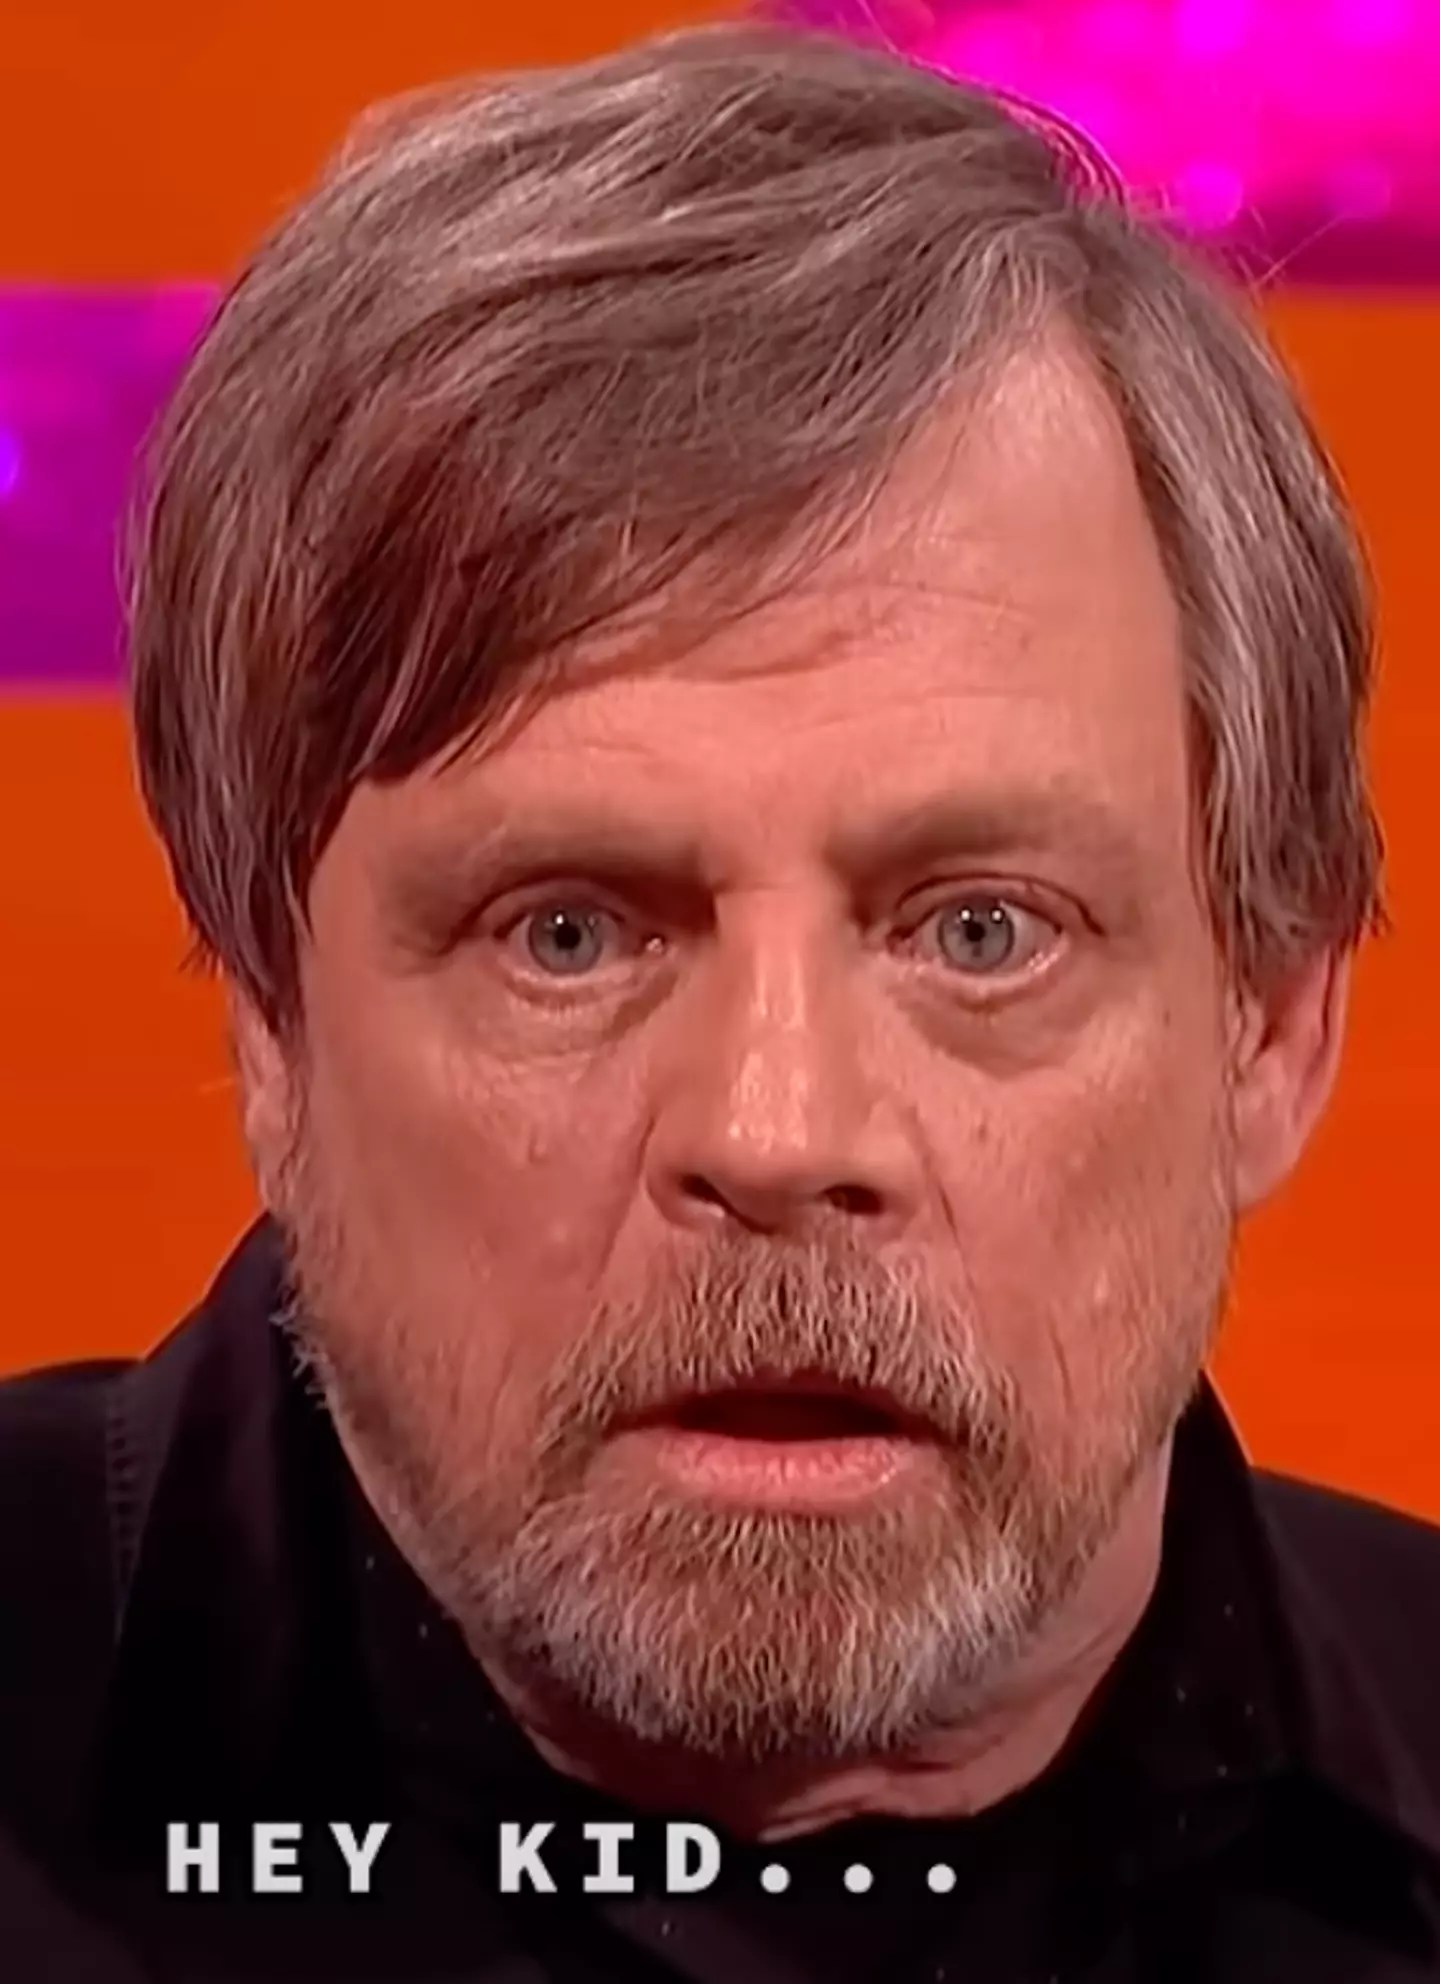 Hamill's impression of Harrison Ford has left viewers in stitches.